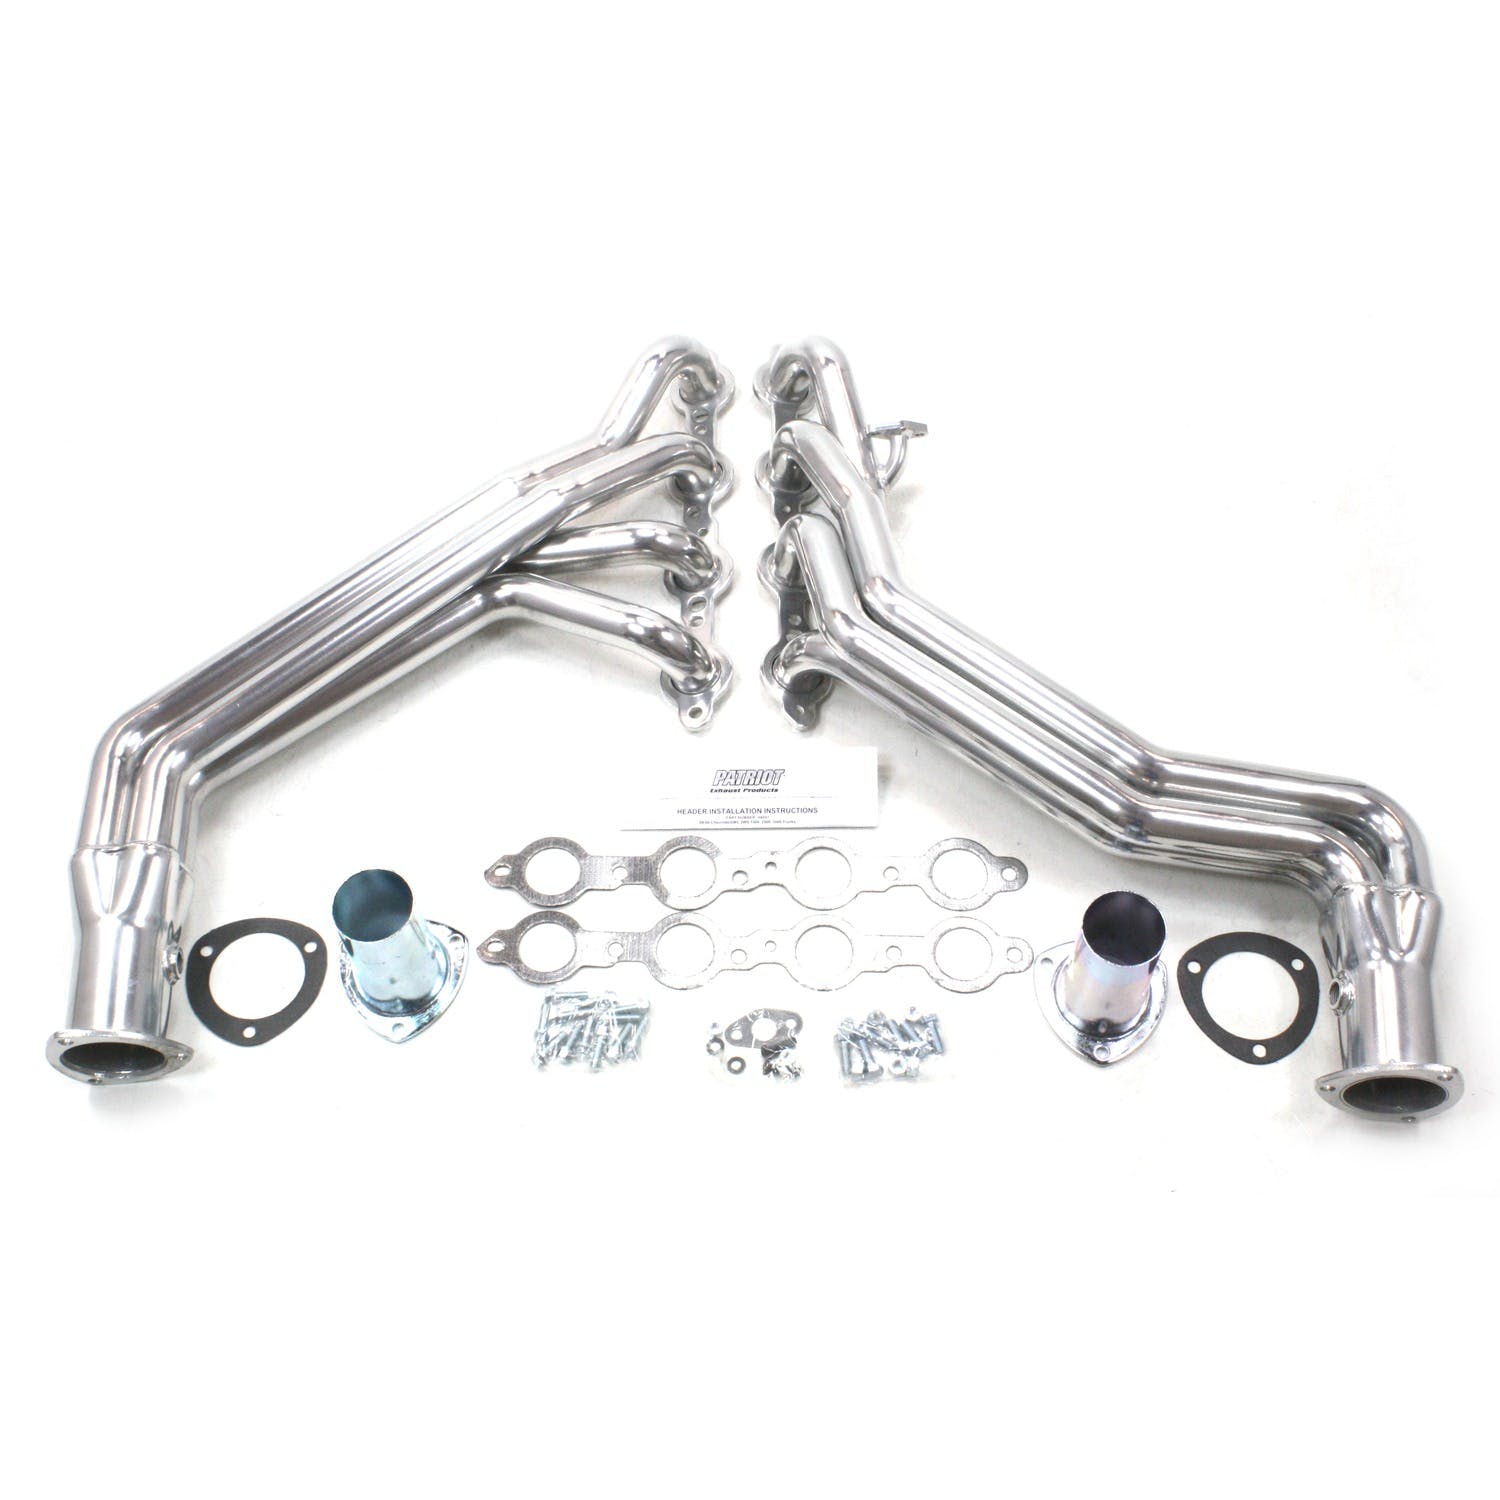 Patriot Exhaust H8057-1 99-06 GM Truck 2WD Long Tube Silver